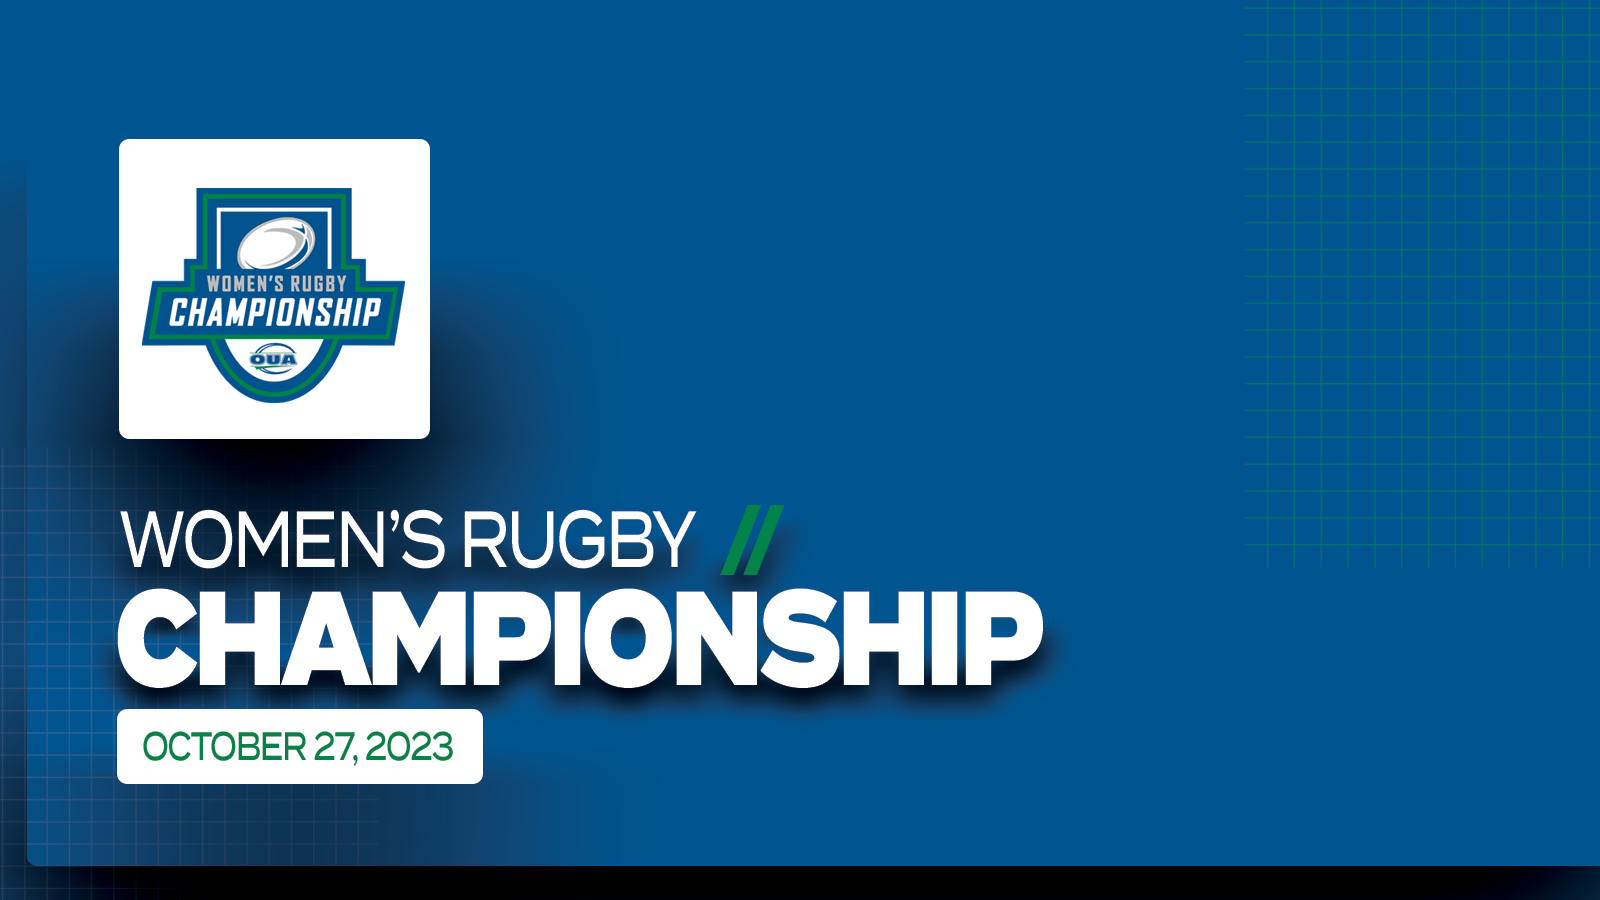 Predominantly blue graphic with large white text on the left side that reads Women's Rugby Championship, October 27, 2023' beneath the OUA Women's Rugby Championship logo